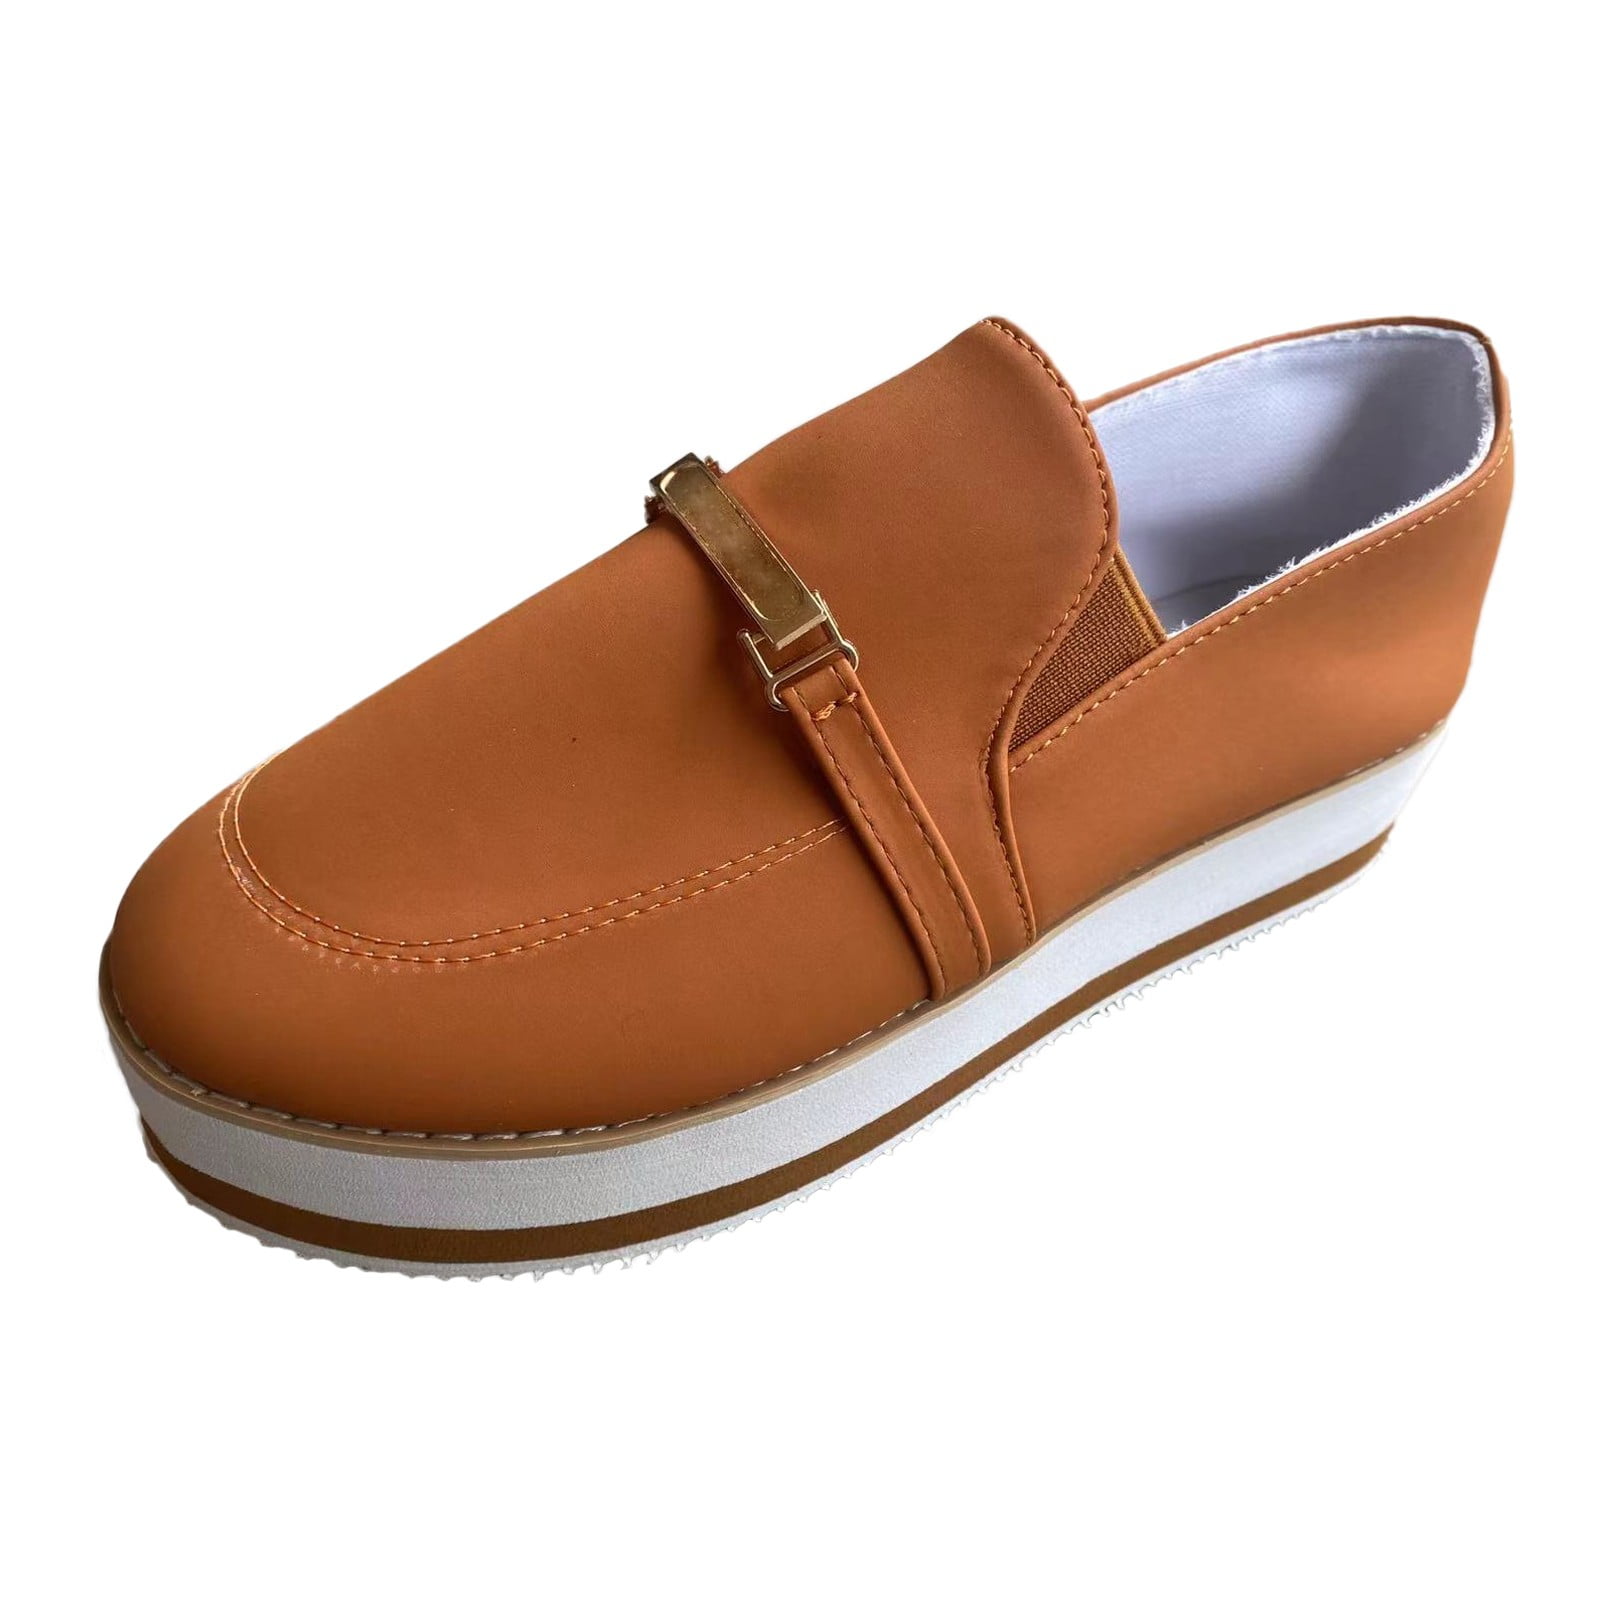 Sperry Women's A/O Haven Boat Shoe - Brown | Discount Sperry Ladies Shoes &  More - Shoolu.com | Shoolu.com